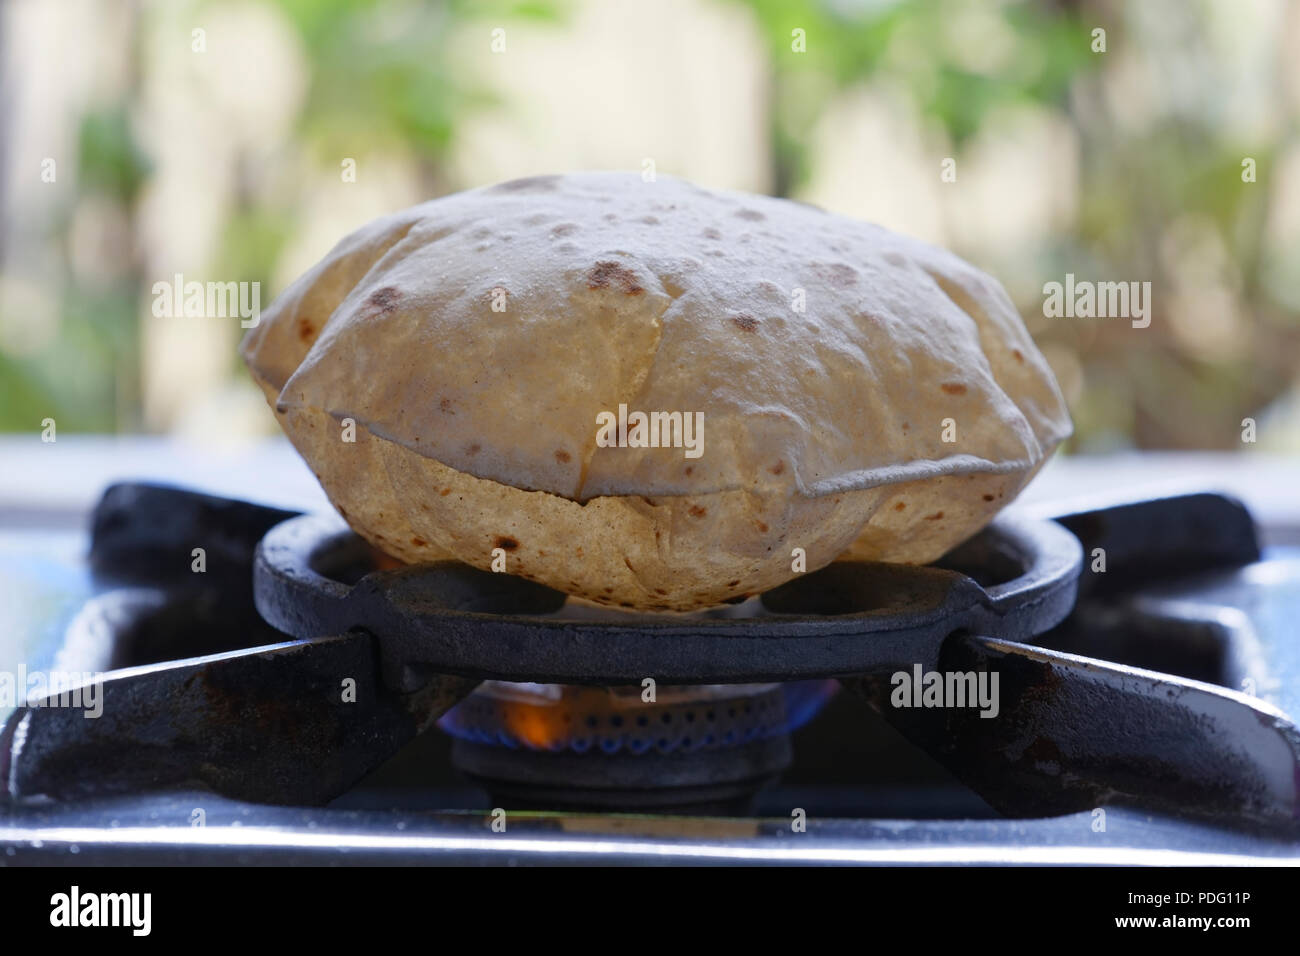 https://c8.alamy.com/comp/PDG11P/phulka-a-kind-of-chapati-home-made-indian-thin-bread-being-cooked-on-gas-stove-at-home-PDG11P.jpg